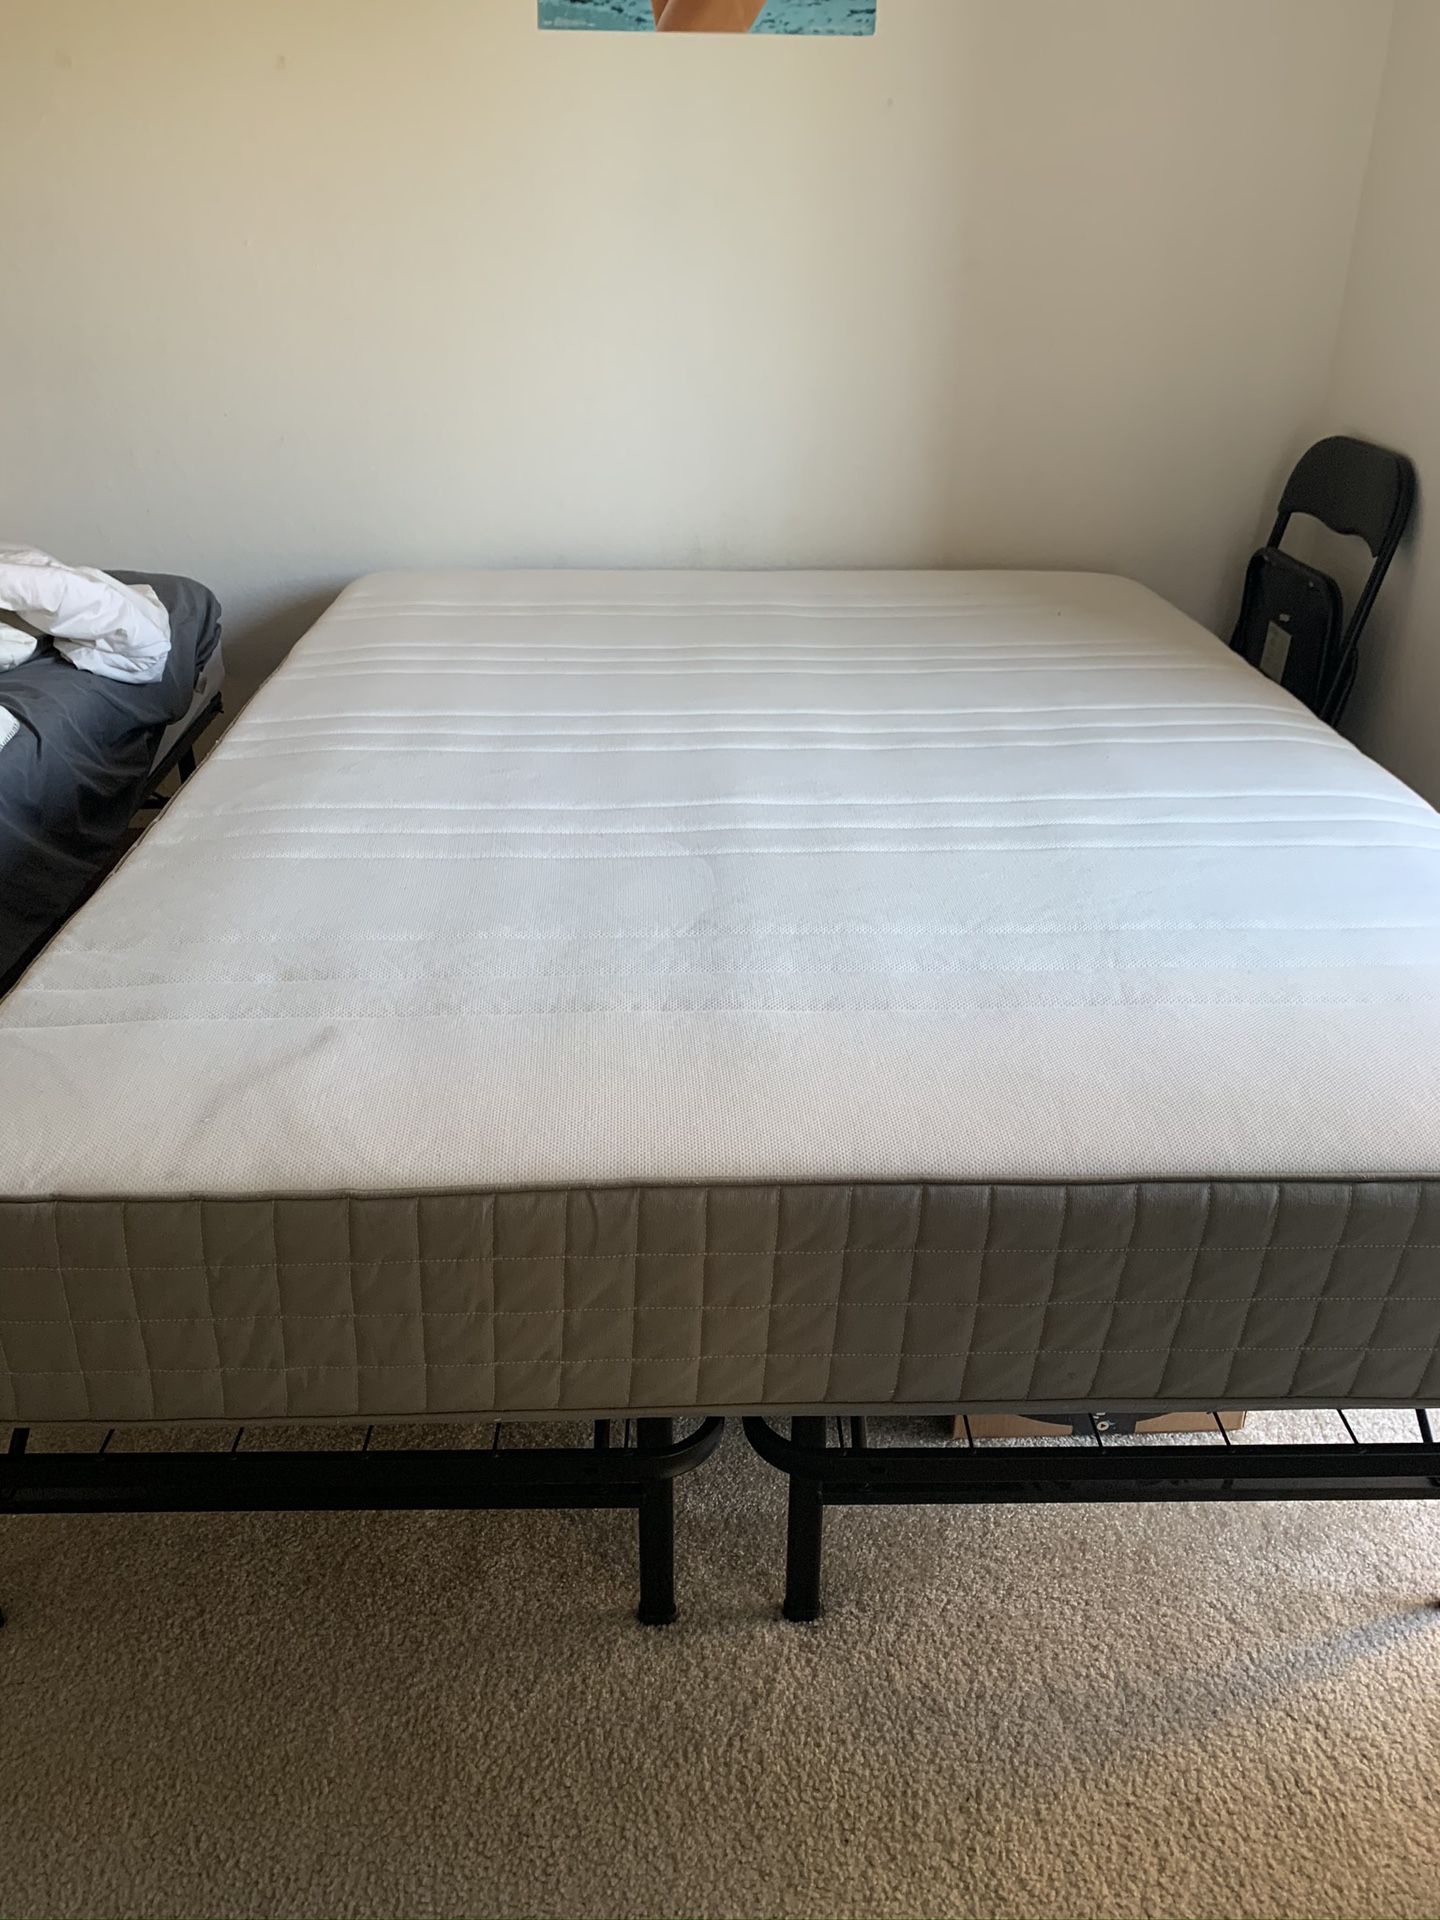 Queen size mattress with foldable bed frame